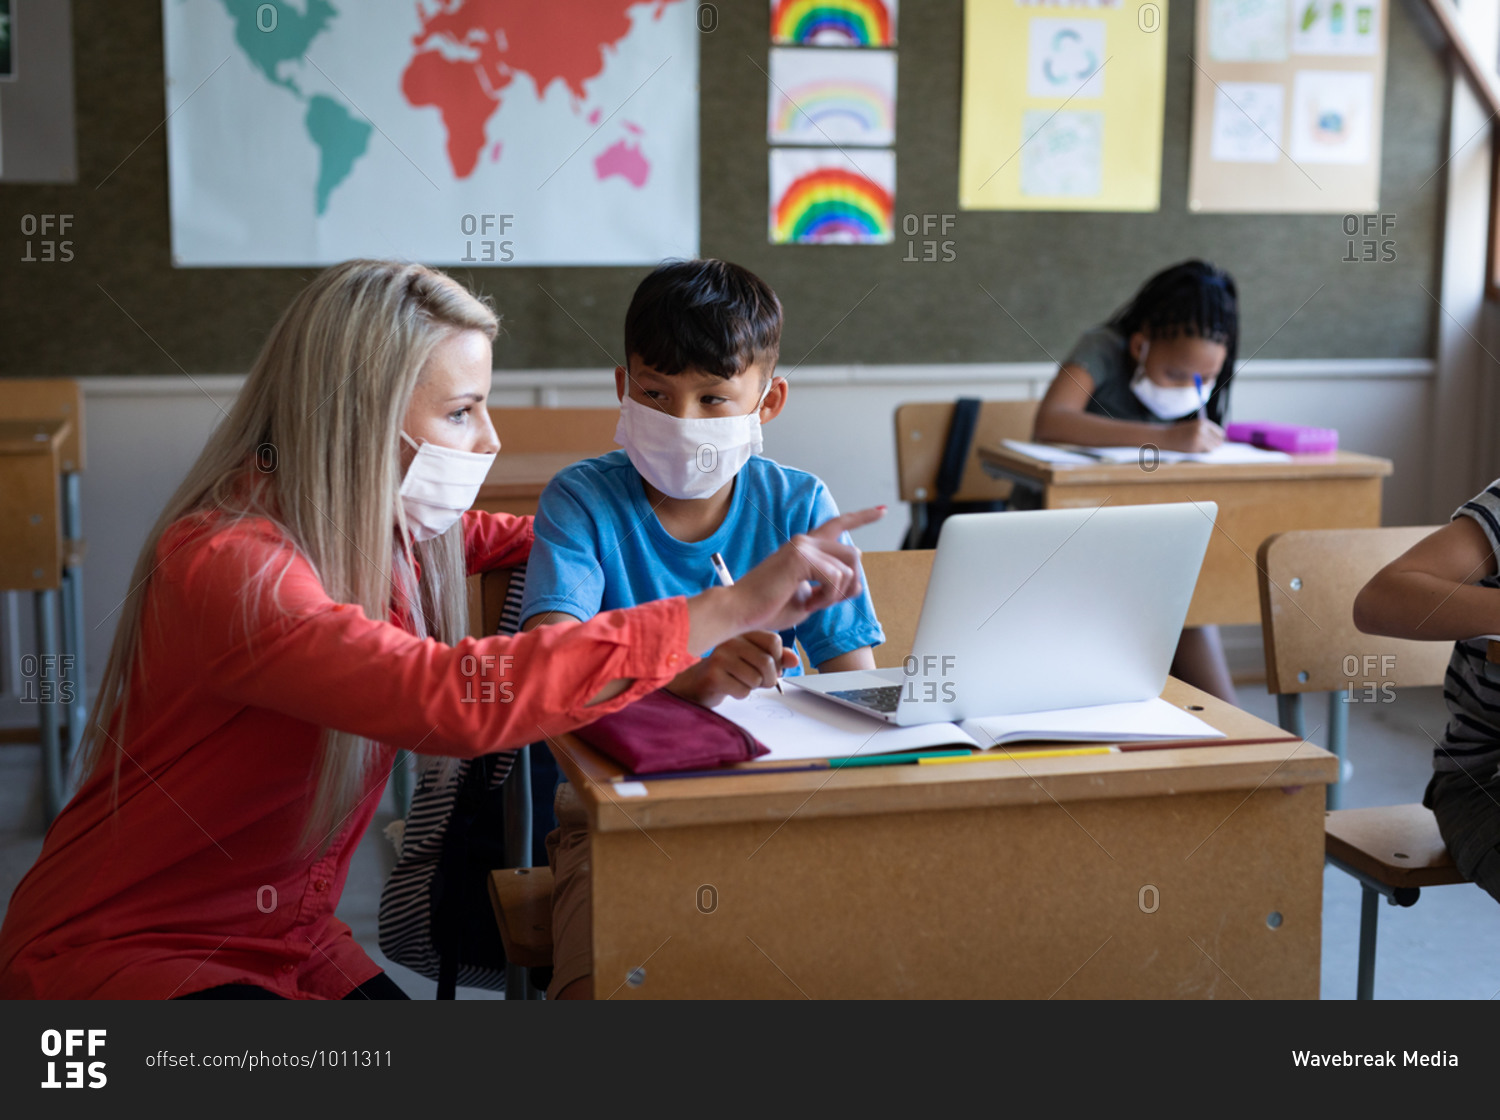 Female Caucasian teacher and mixed race boy wearing face masks using laptop in class at school. Primary education social distancing health safety during Covid19 Coronavirus pandemic.